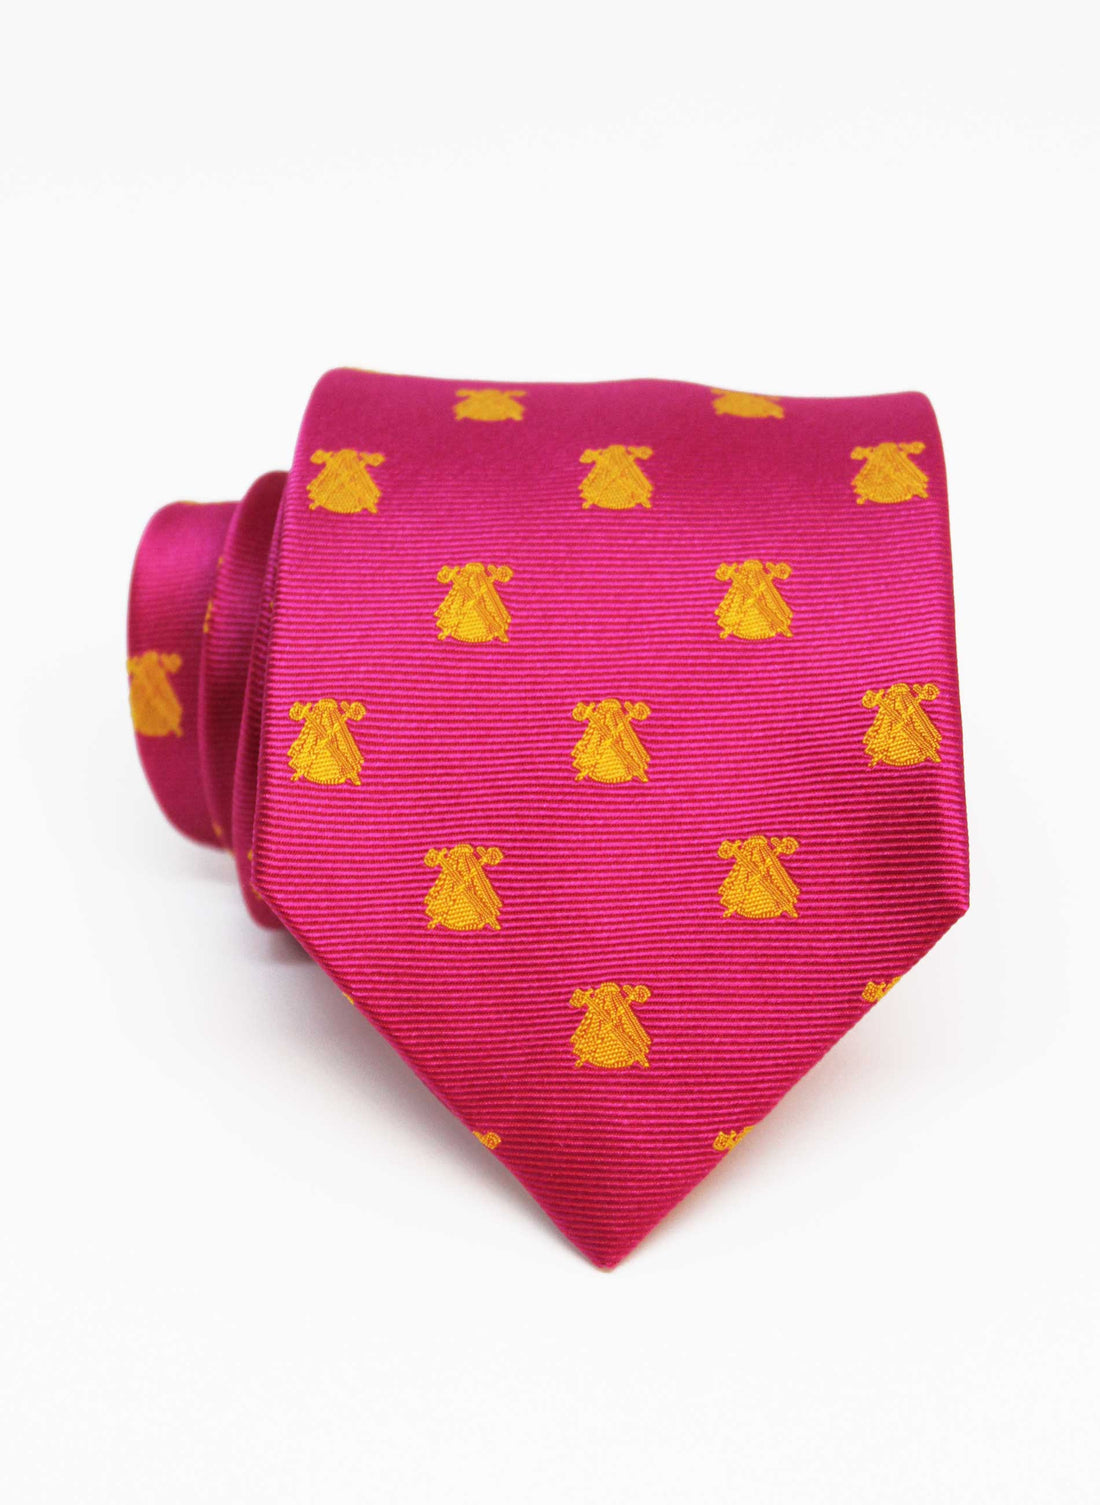 Pink cloak tie with yellow logos 